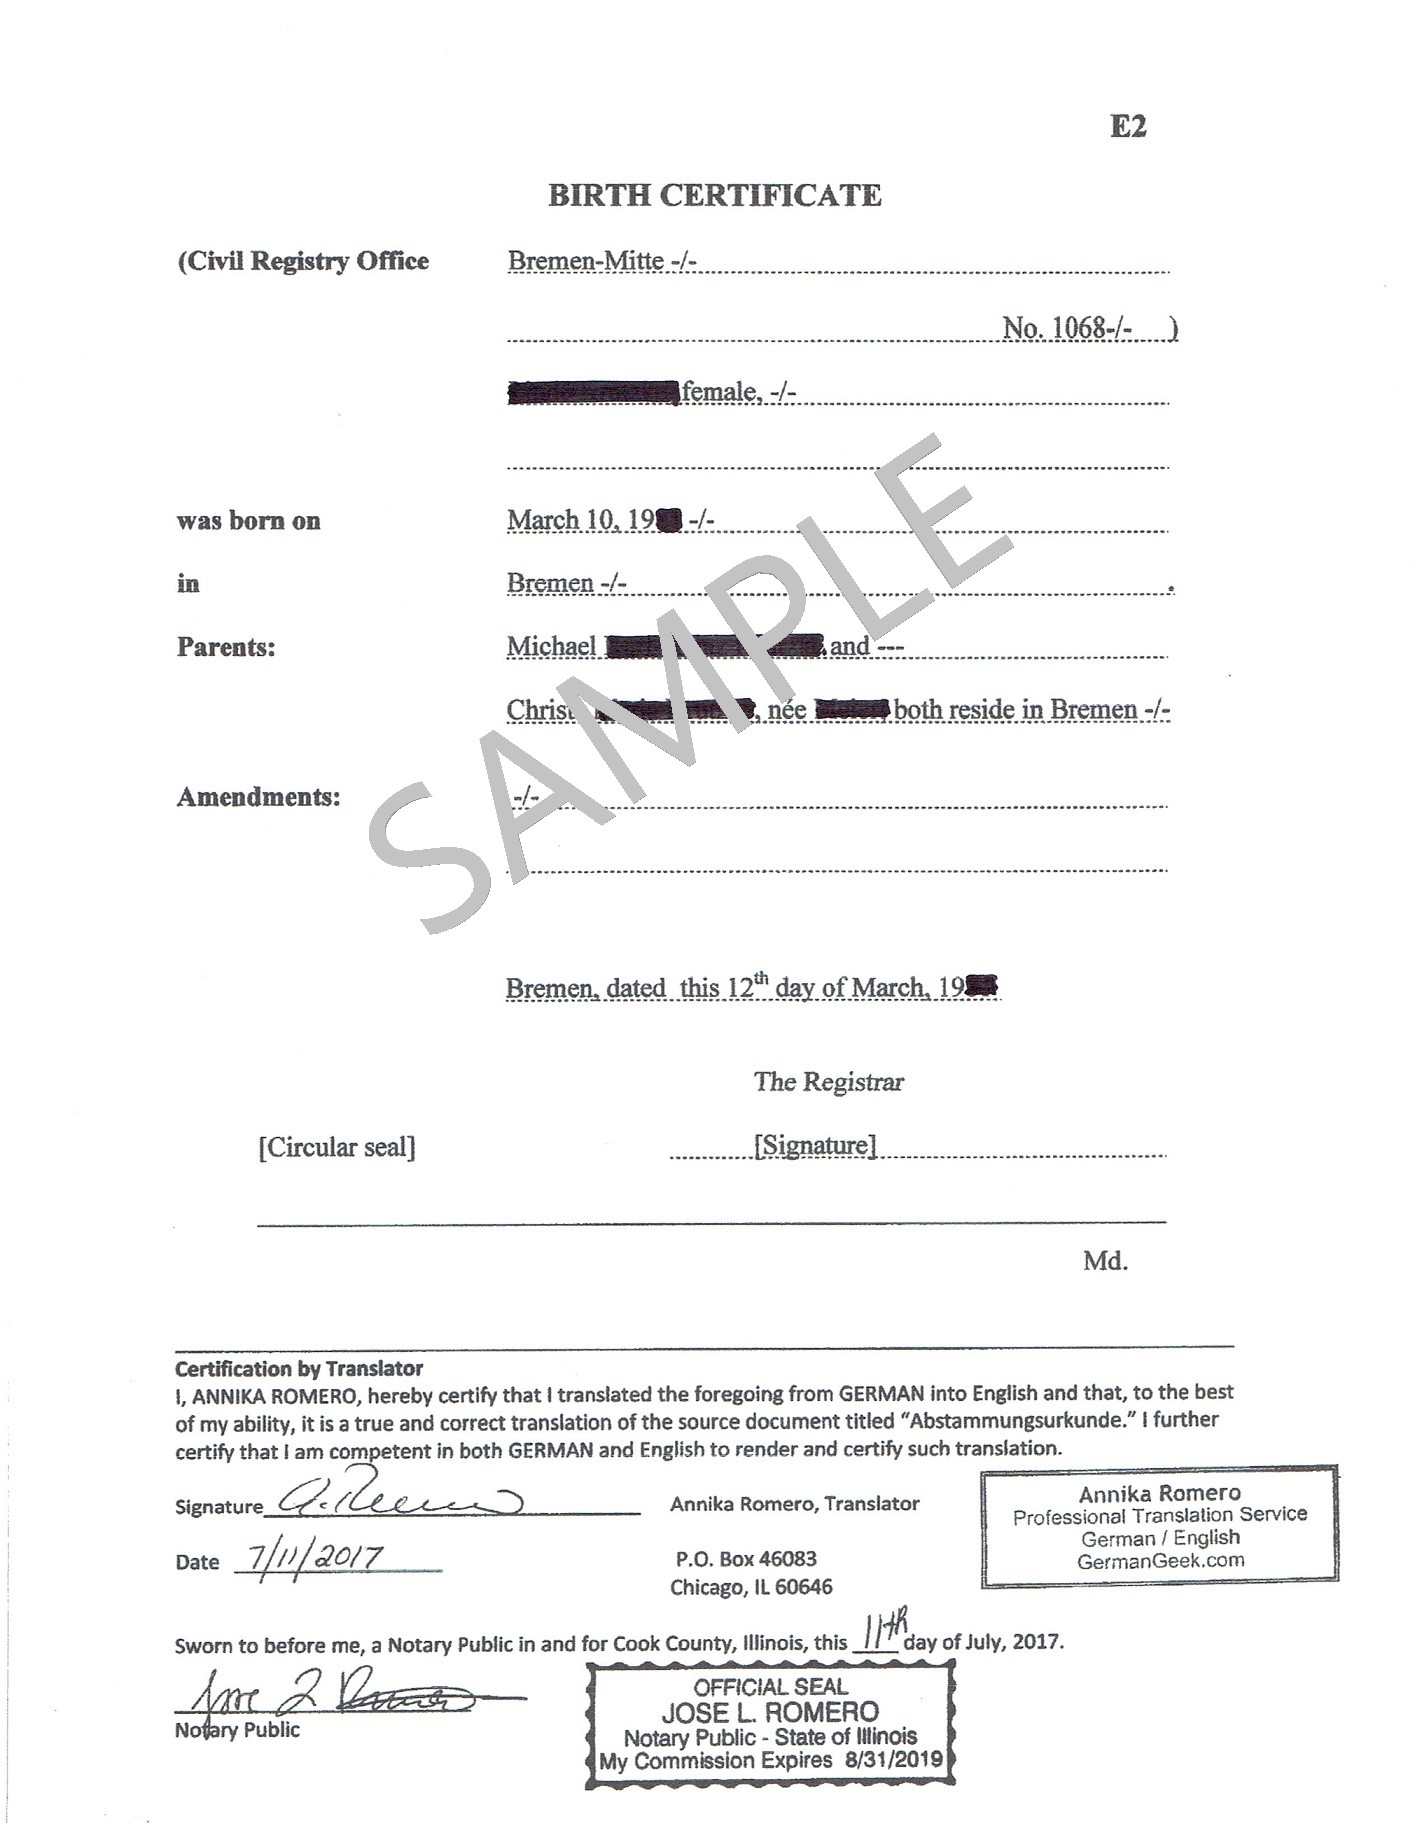 Certified translation of German birth certificate for immigration USCIS